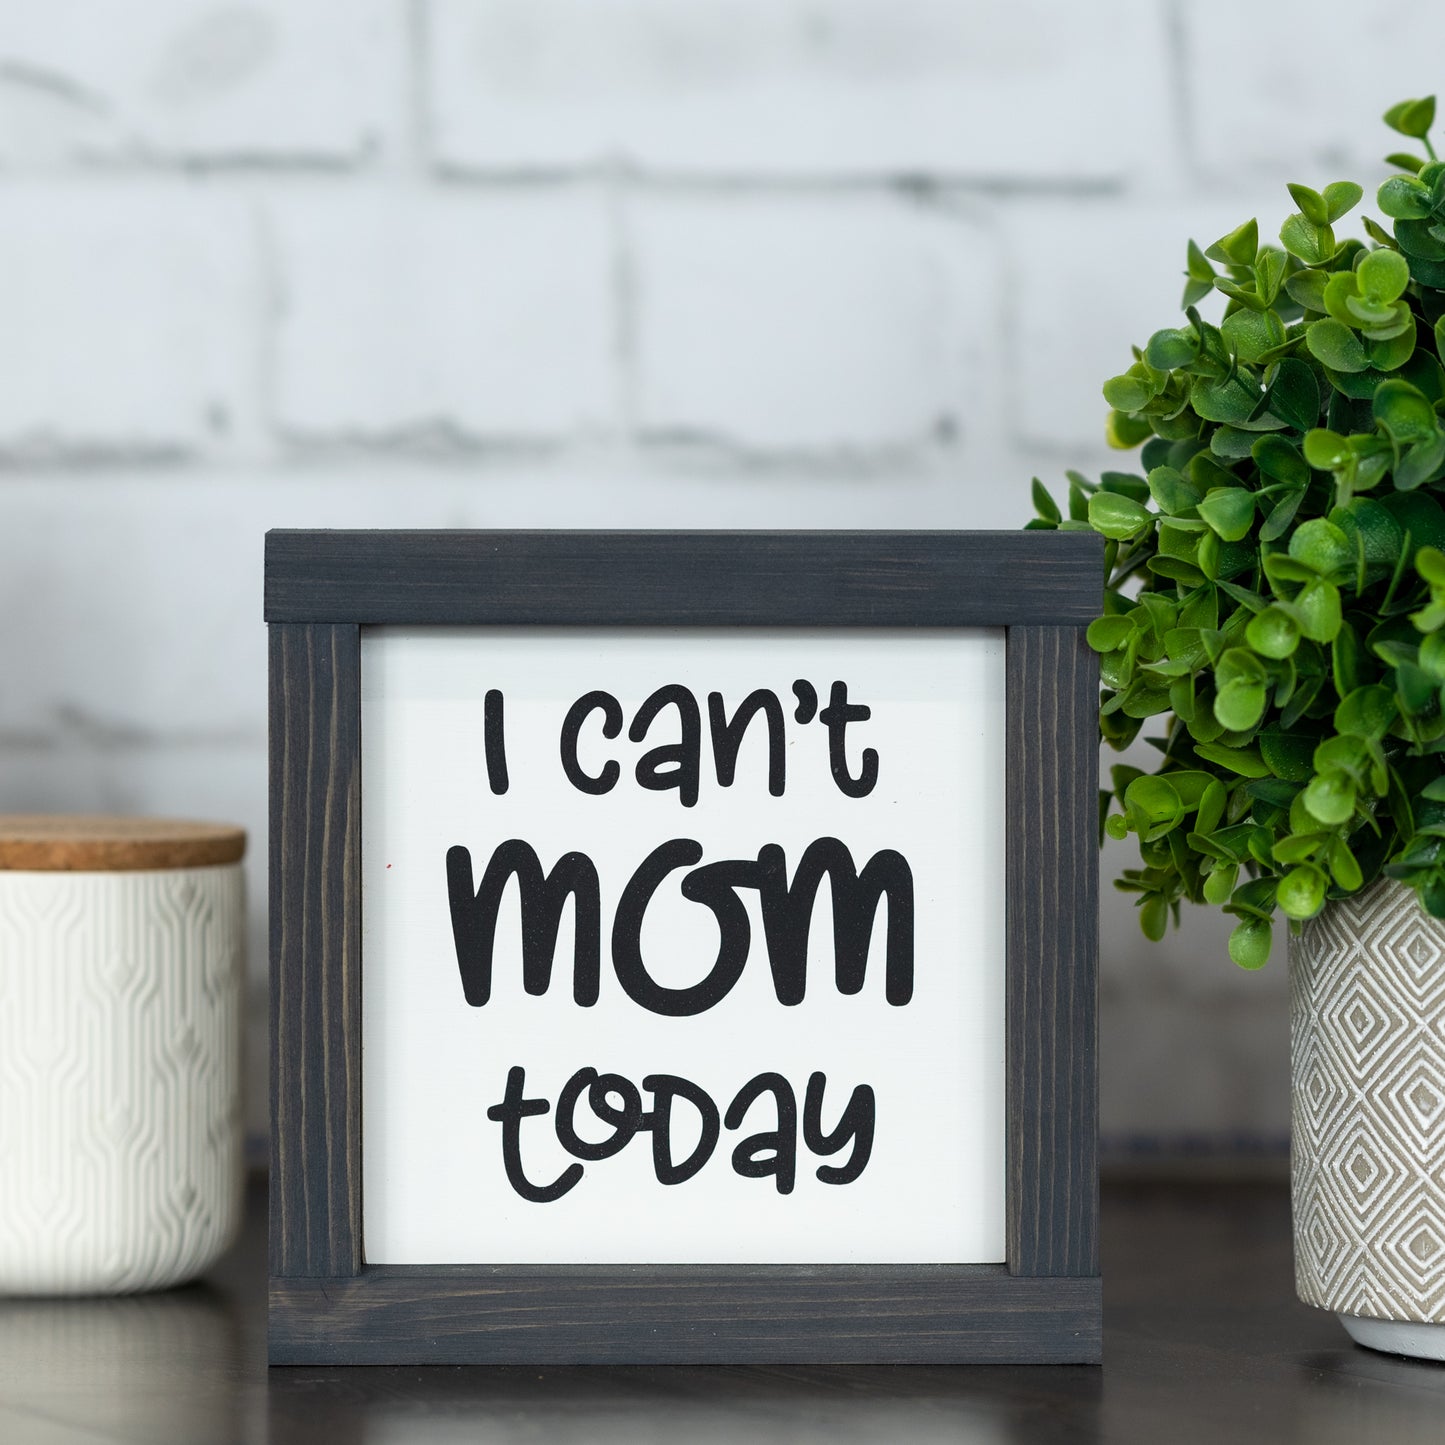 I can't mom today ~ wood sign